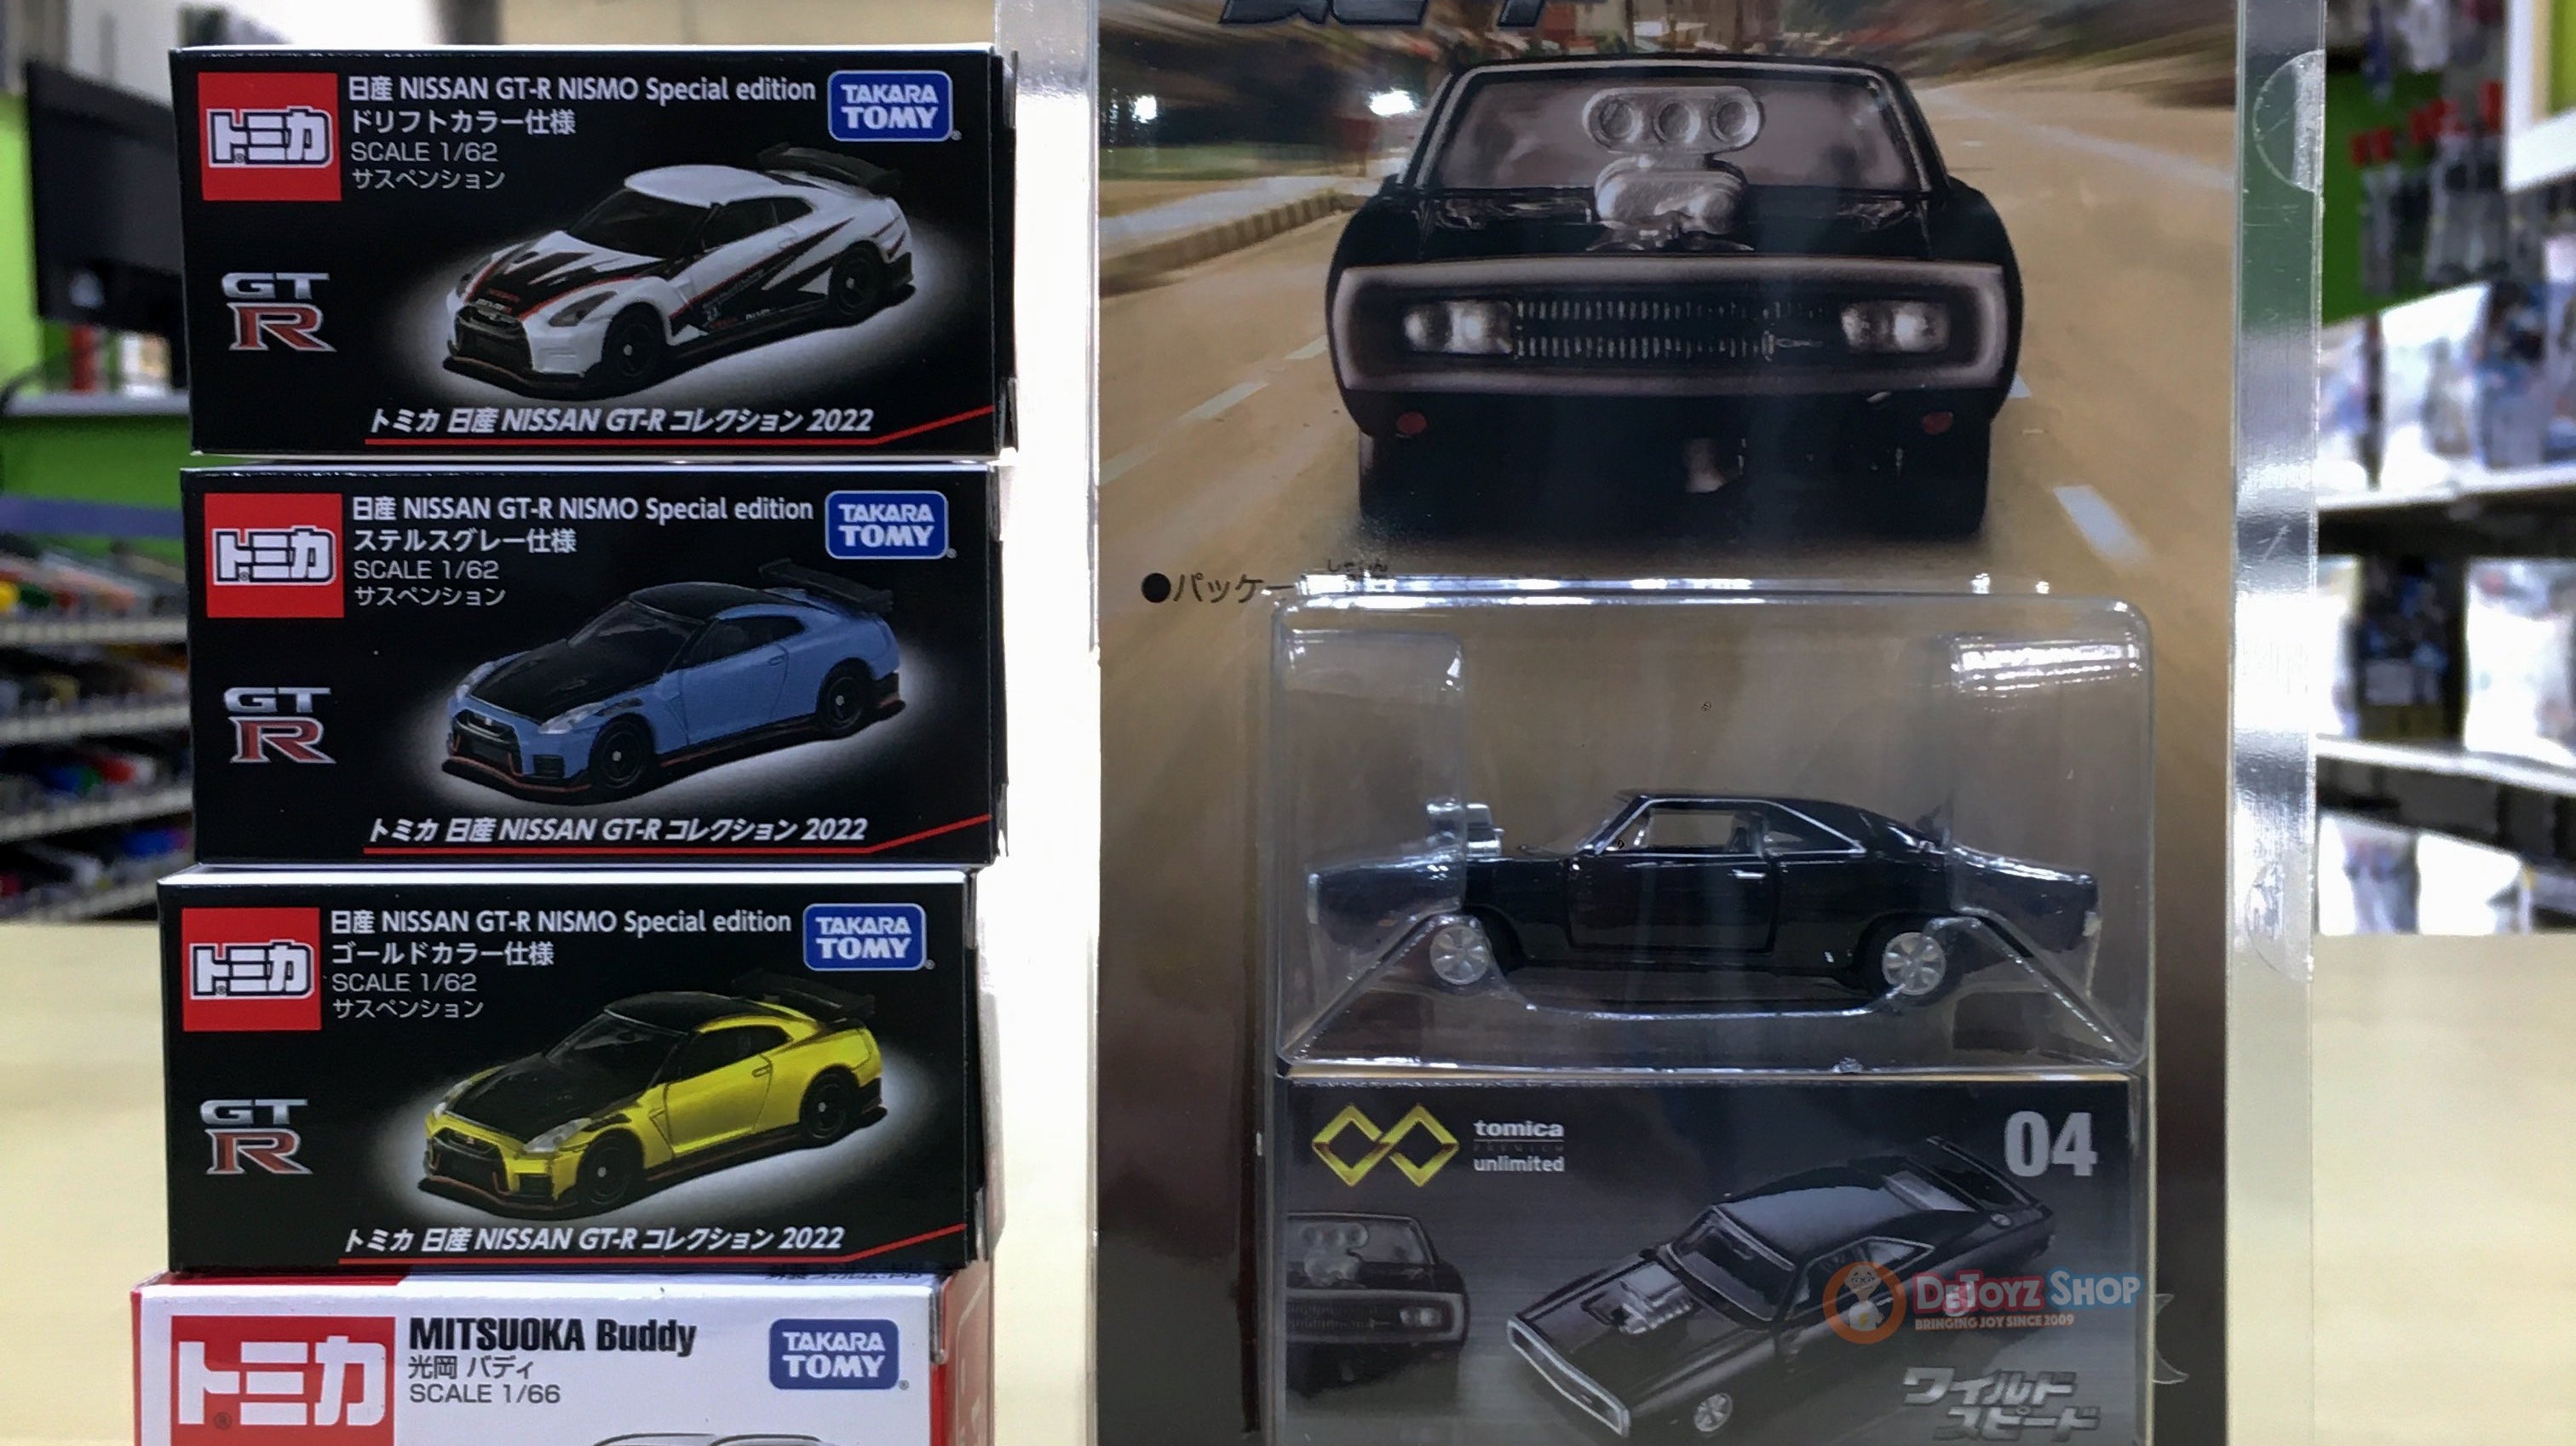 Tomica Premium Unlimited 04 The Fast & Furious Dodge Charger